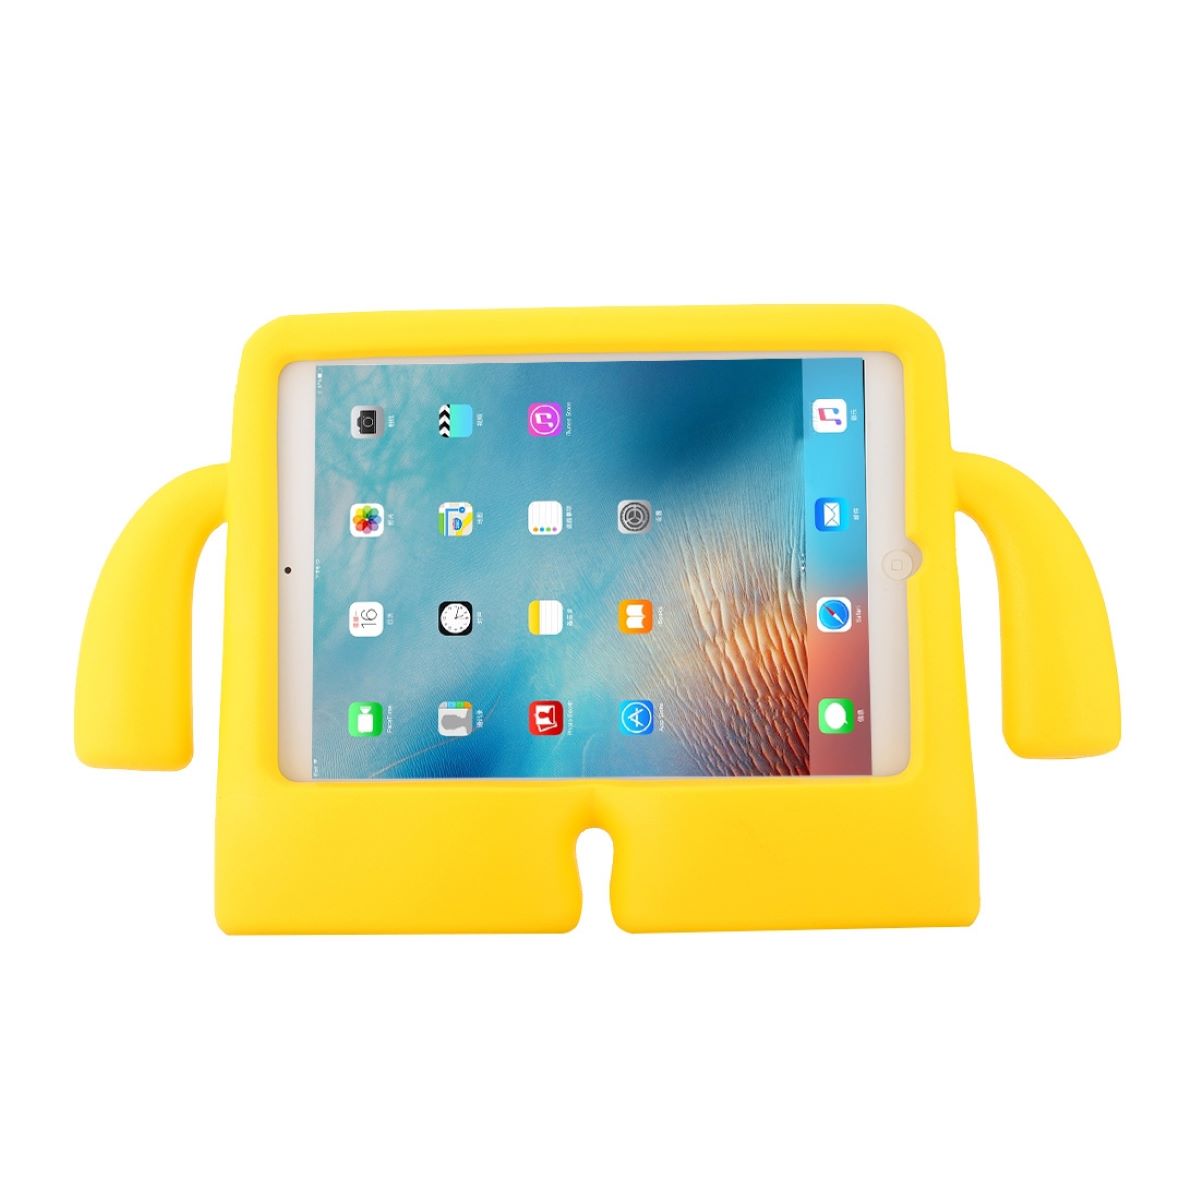 How To Childproof An IPad